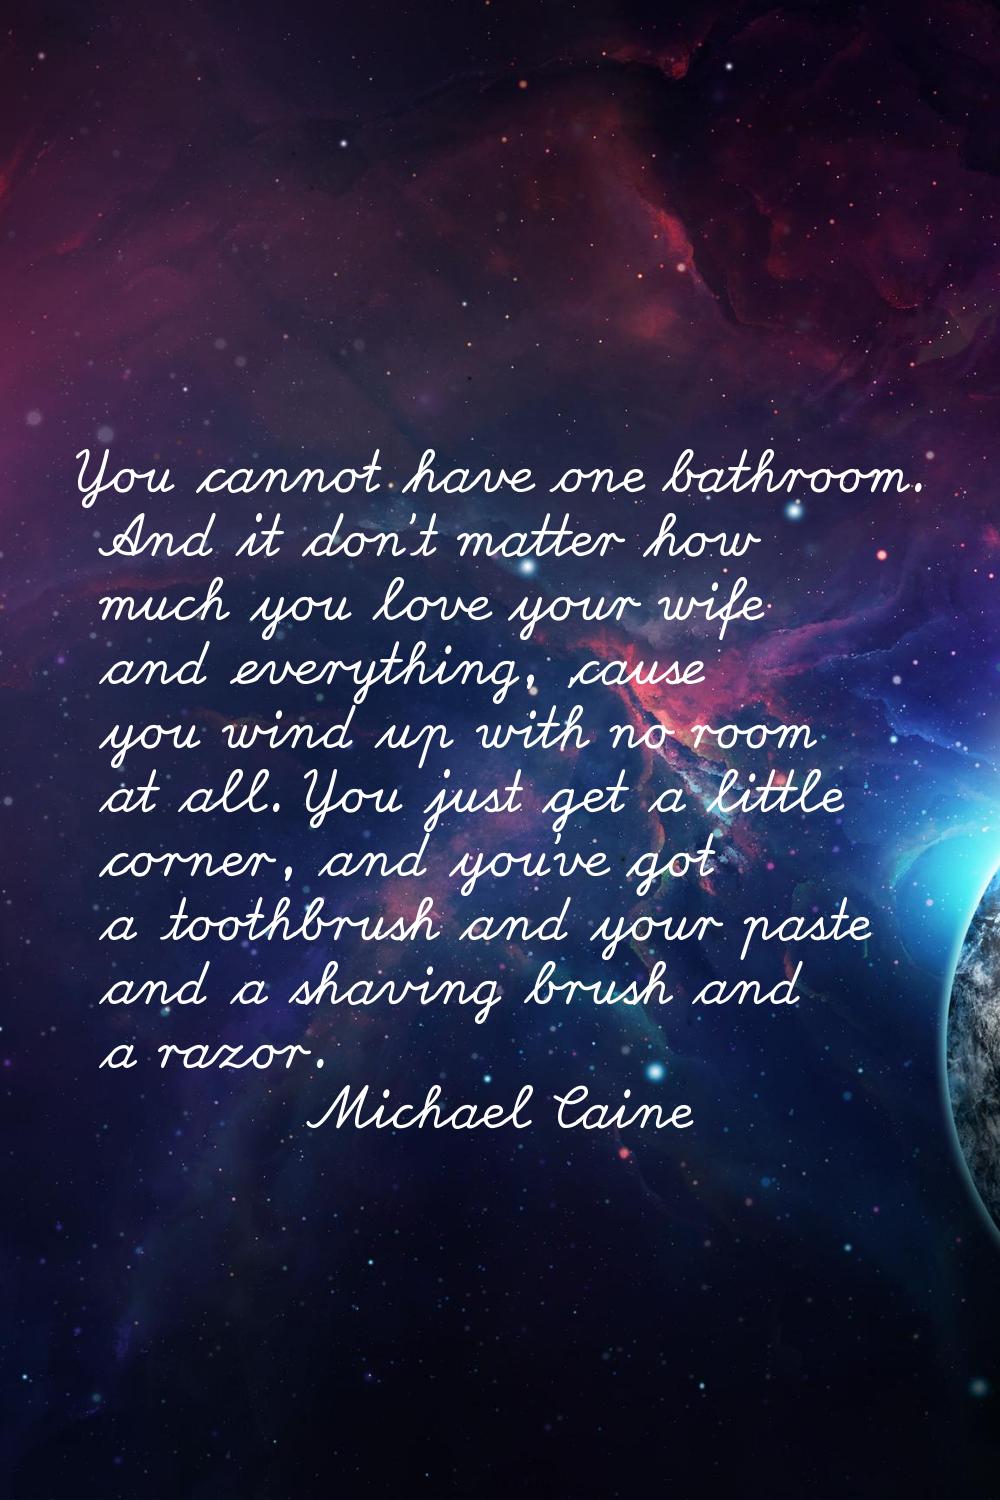 You cannot have one bathroom. And it don't matter how much you love your wife and everything, 'caus